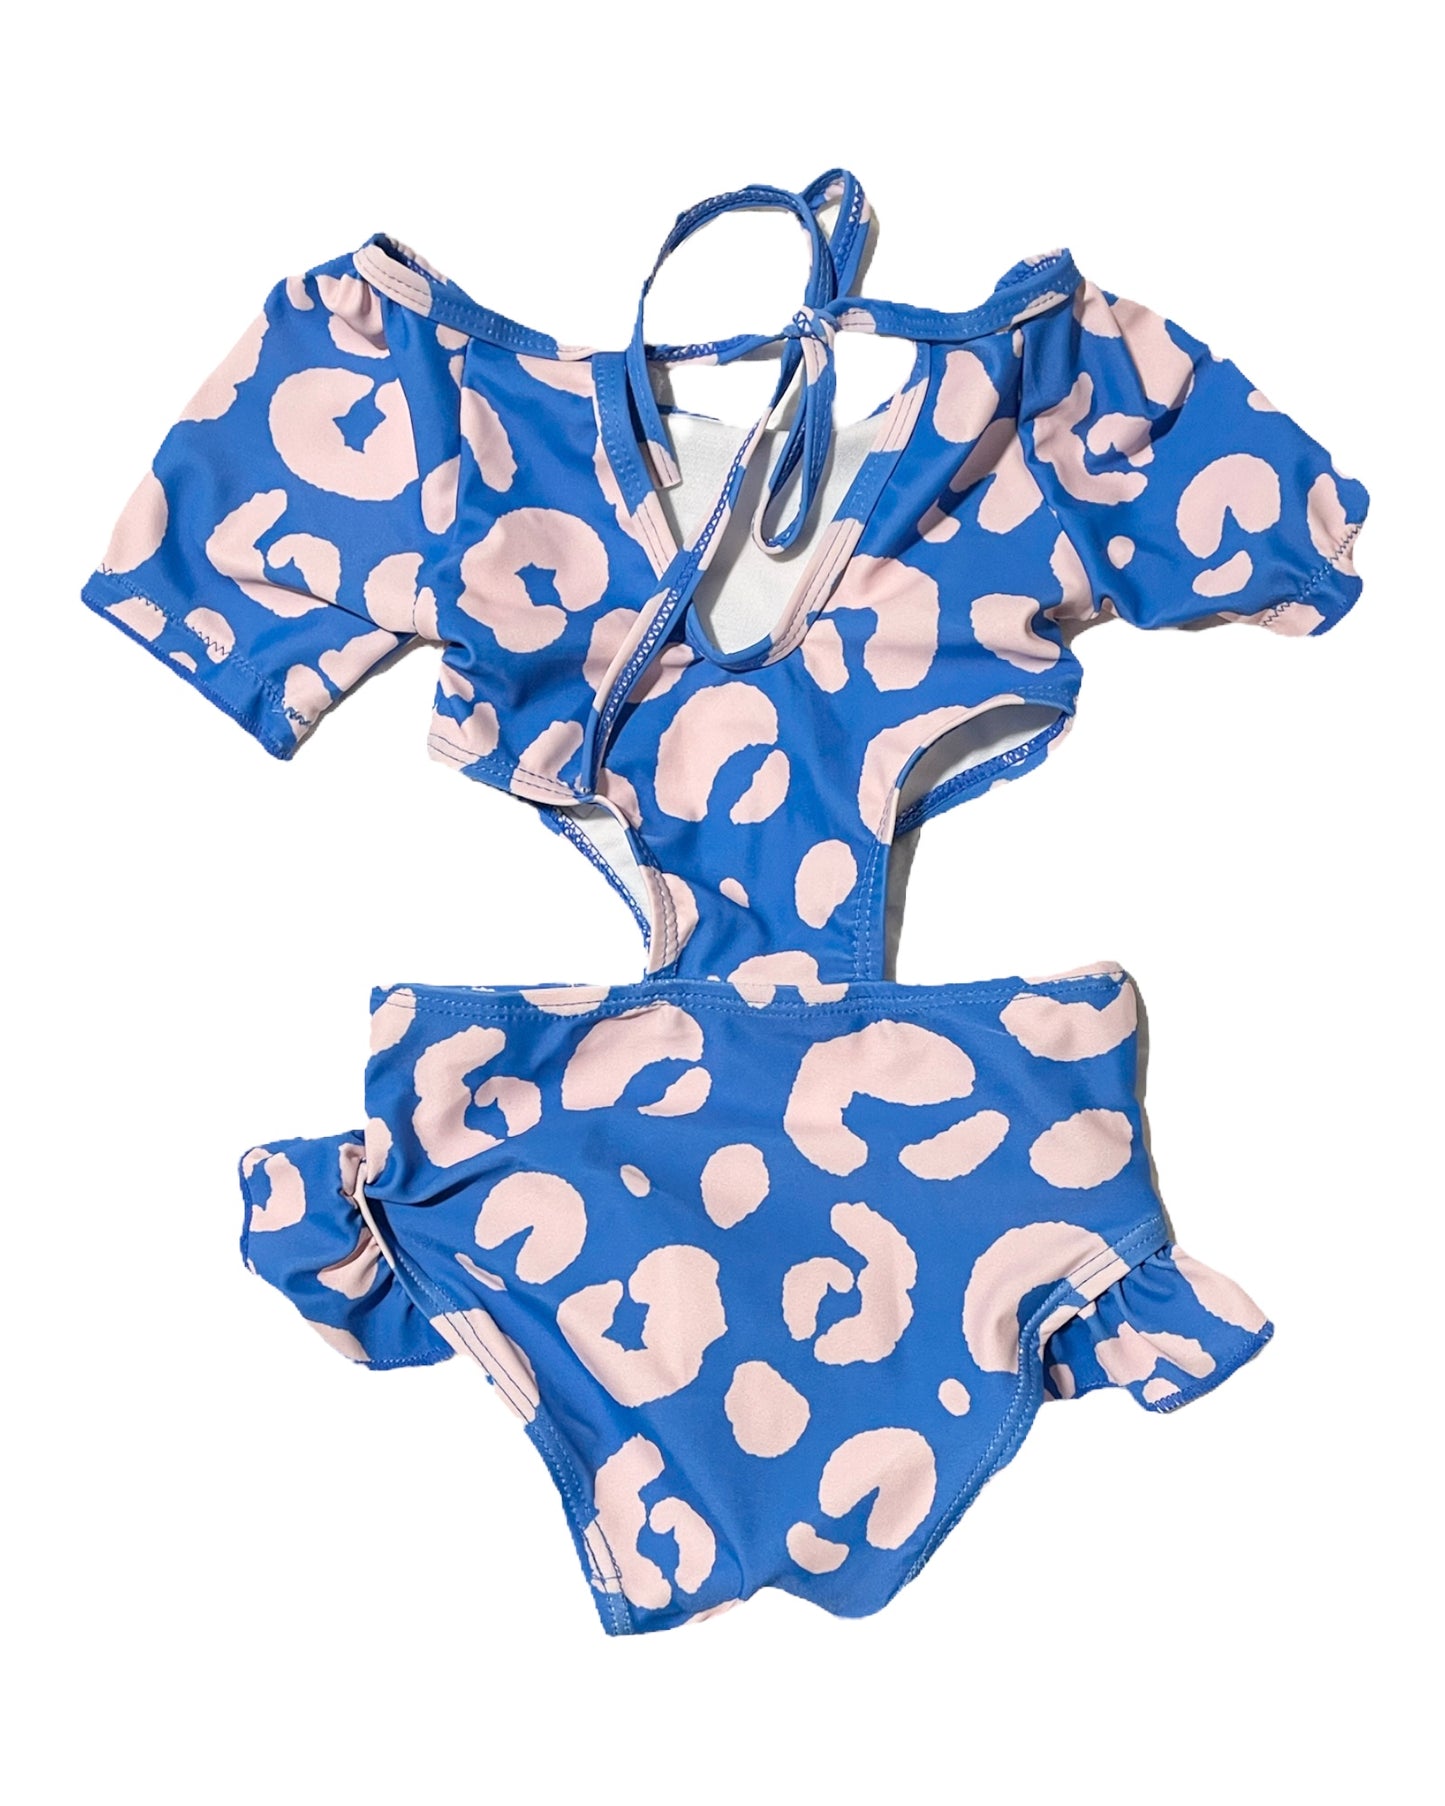 blue cut-out one piece swimsuit